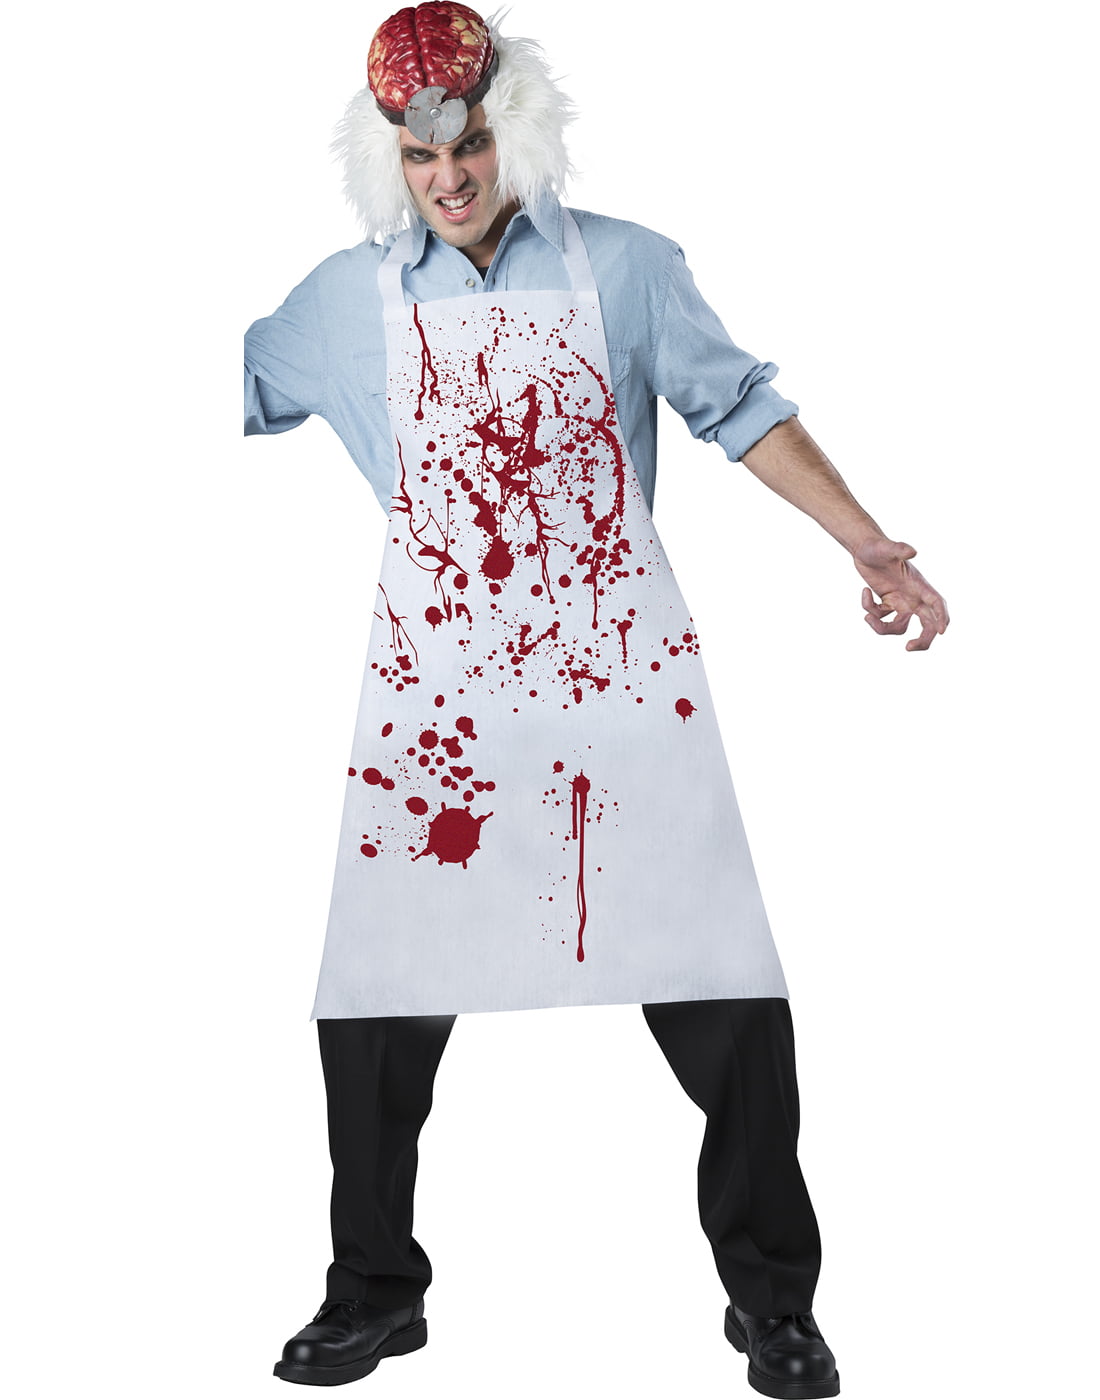 Details about   Creative Cosplays Surgeon Doctor Dress Up Costume for Birthday Halloween Party 